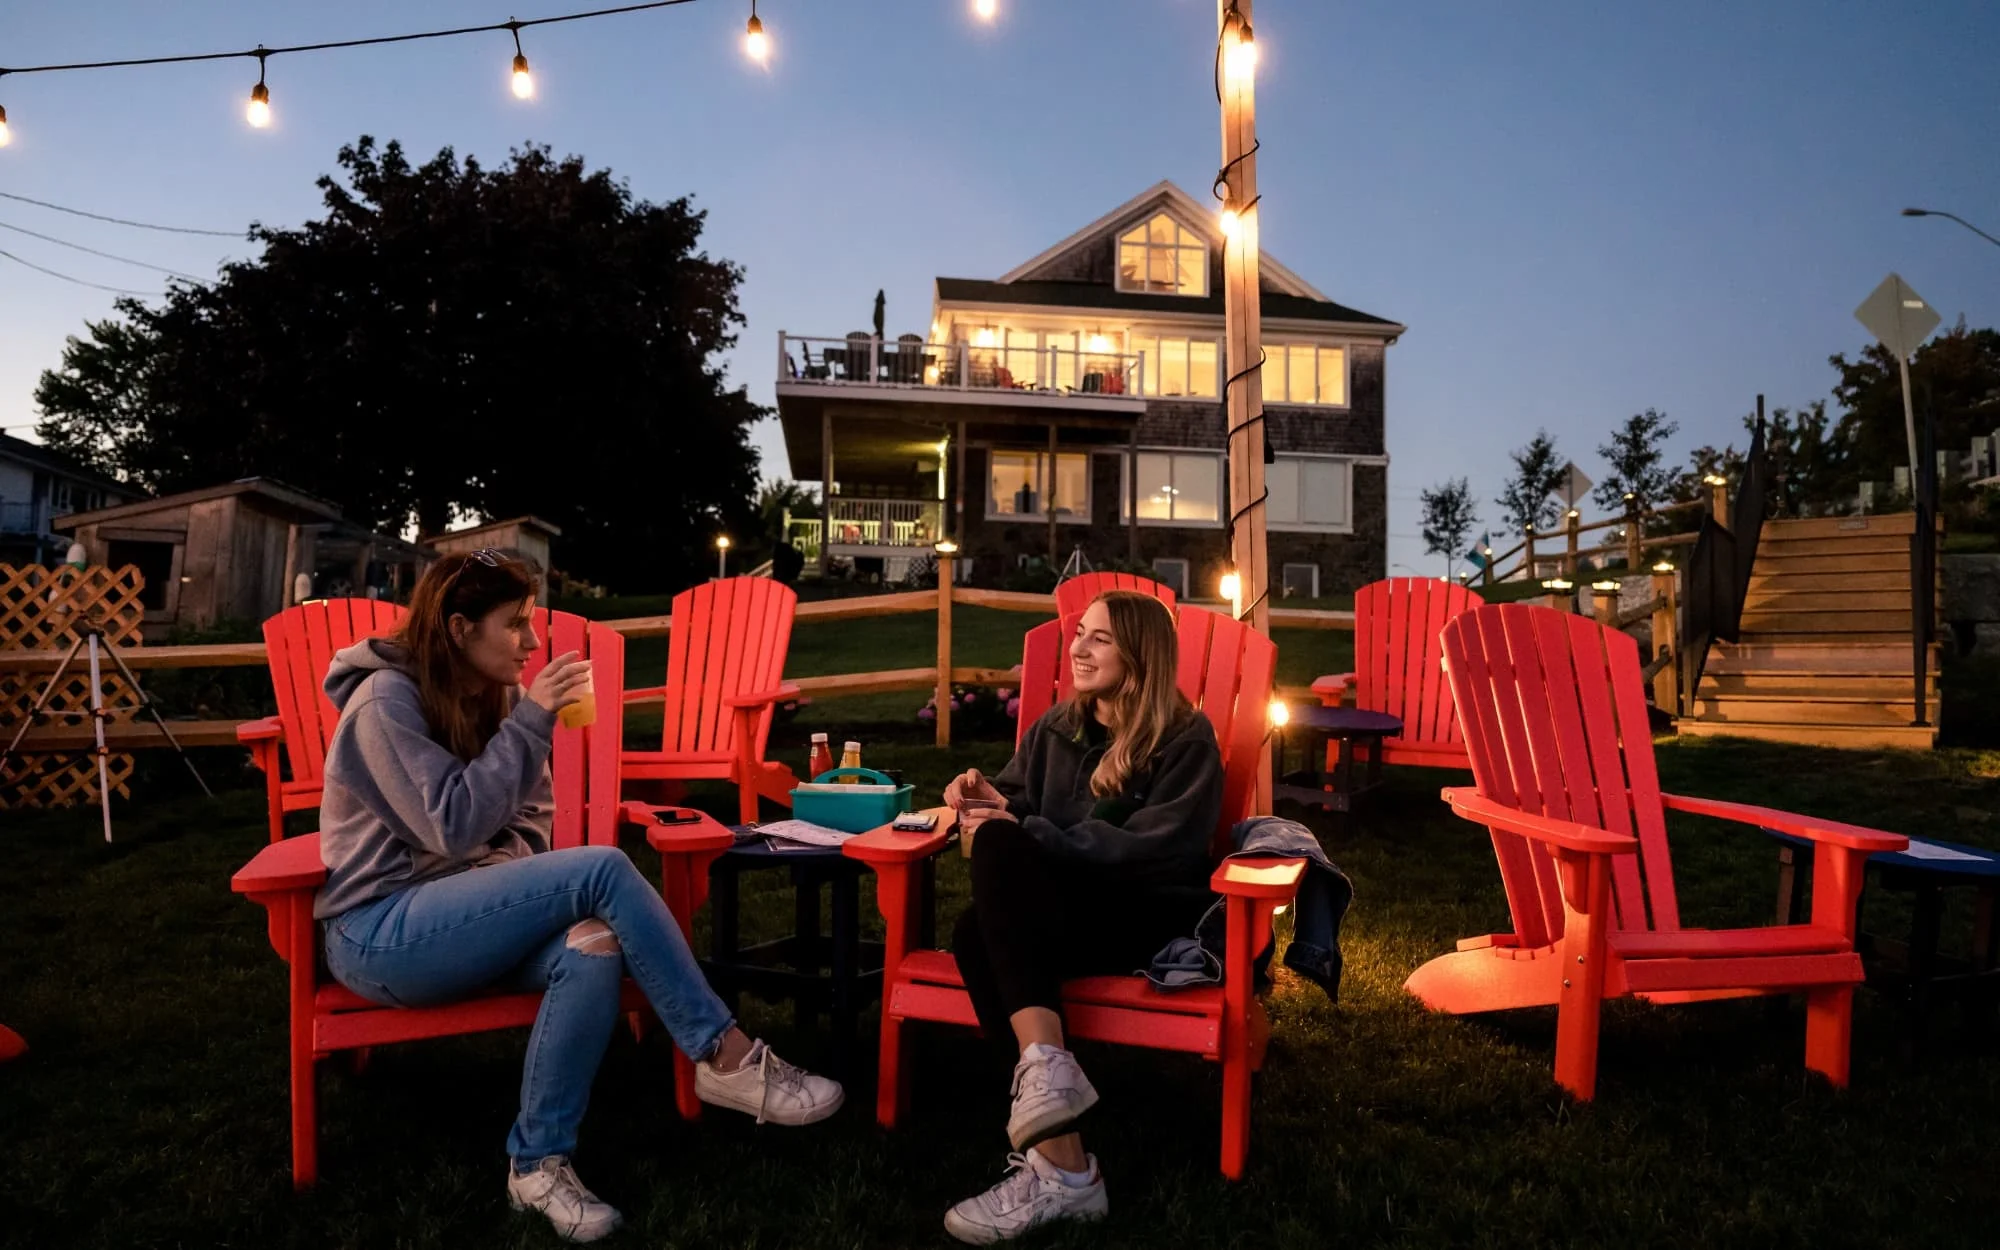 Two women enjoy an evening conversation while seated outside the Buoy Shack.